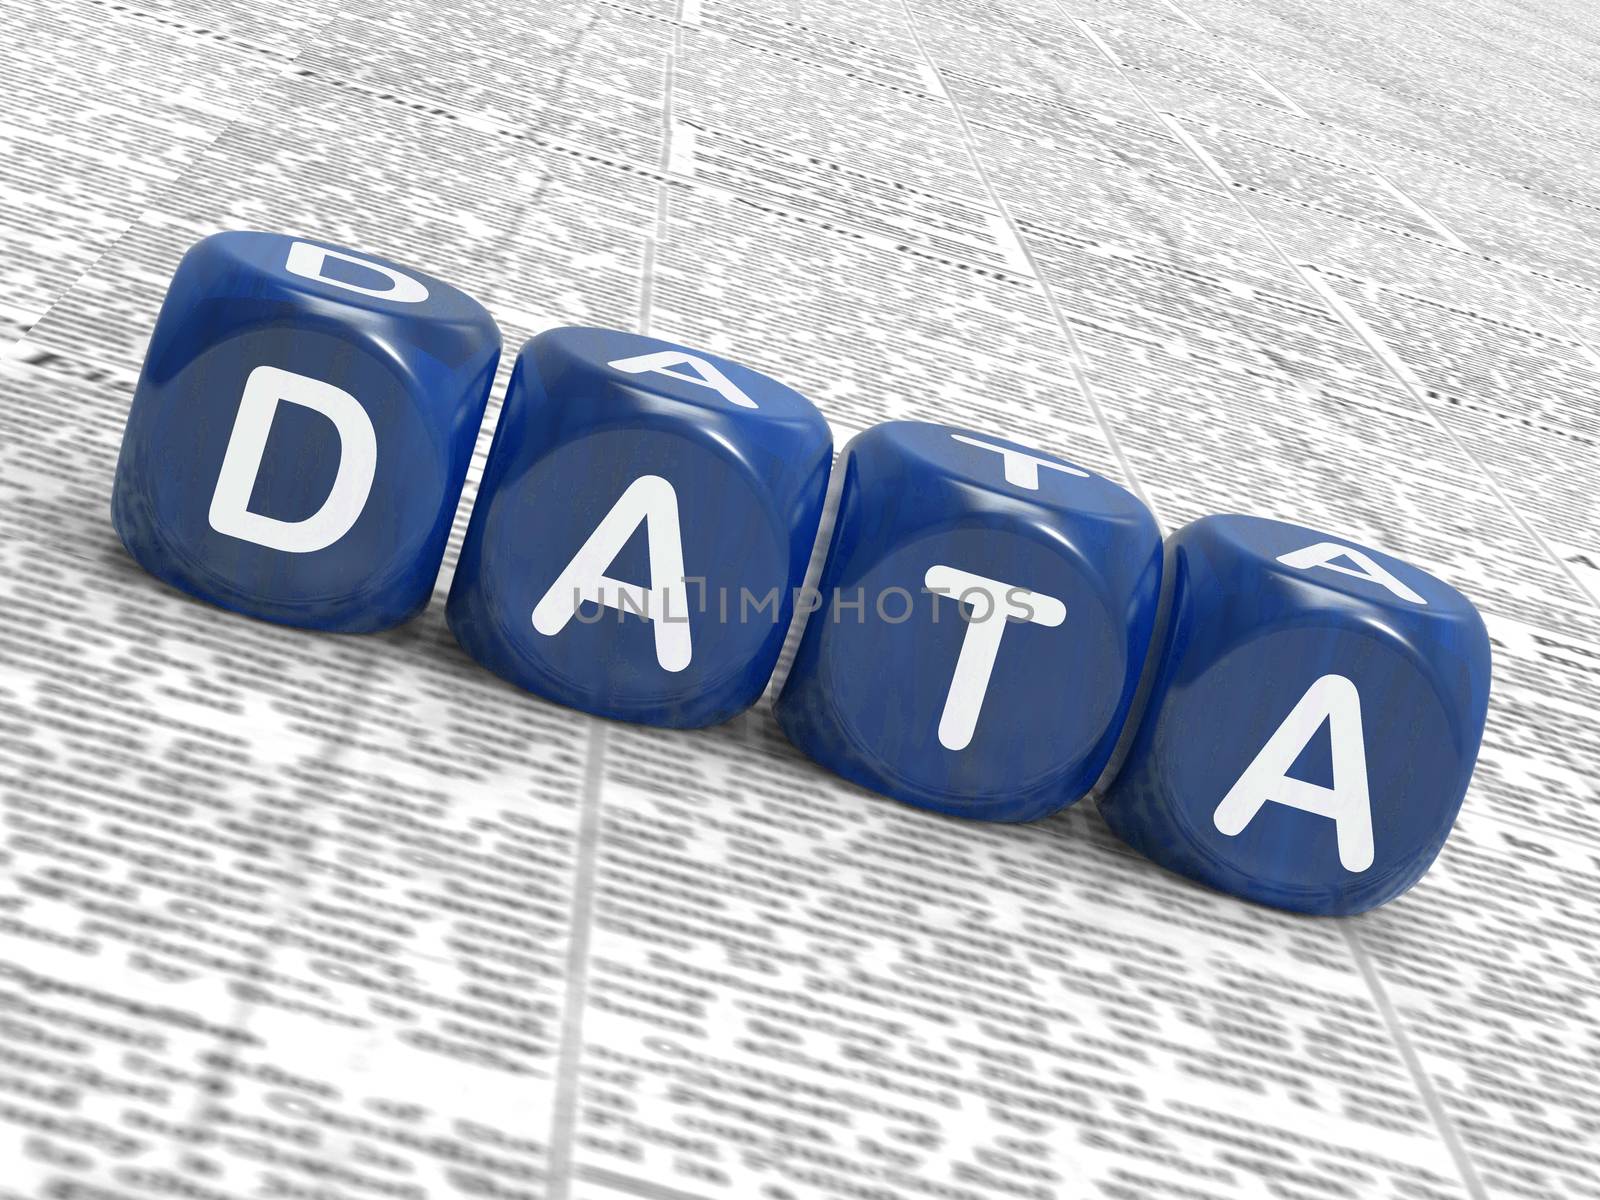 Data Dice Mean Info Statistics And Backup by stuartmiles